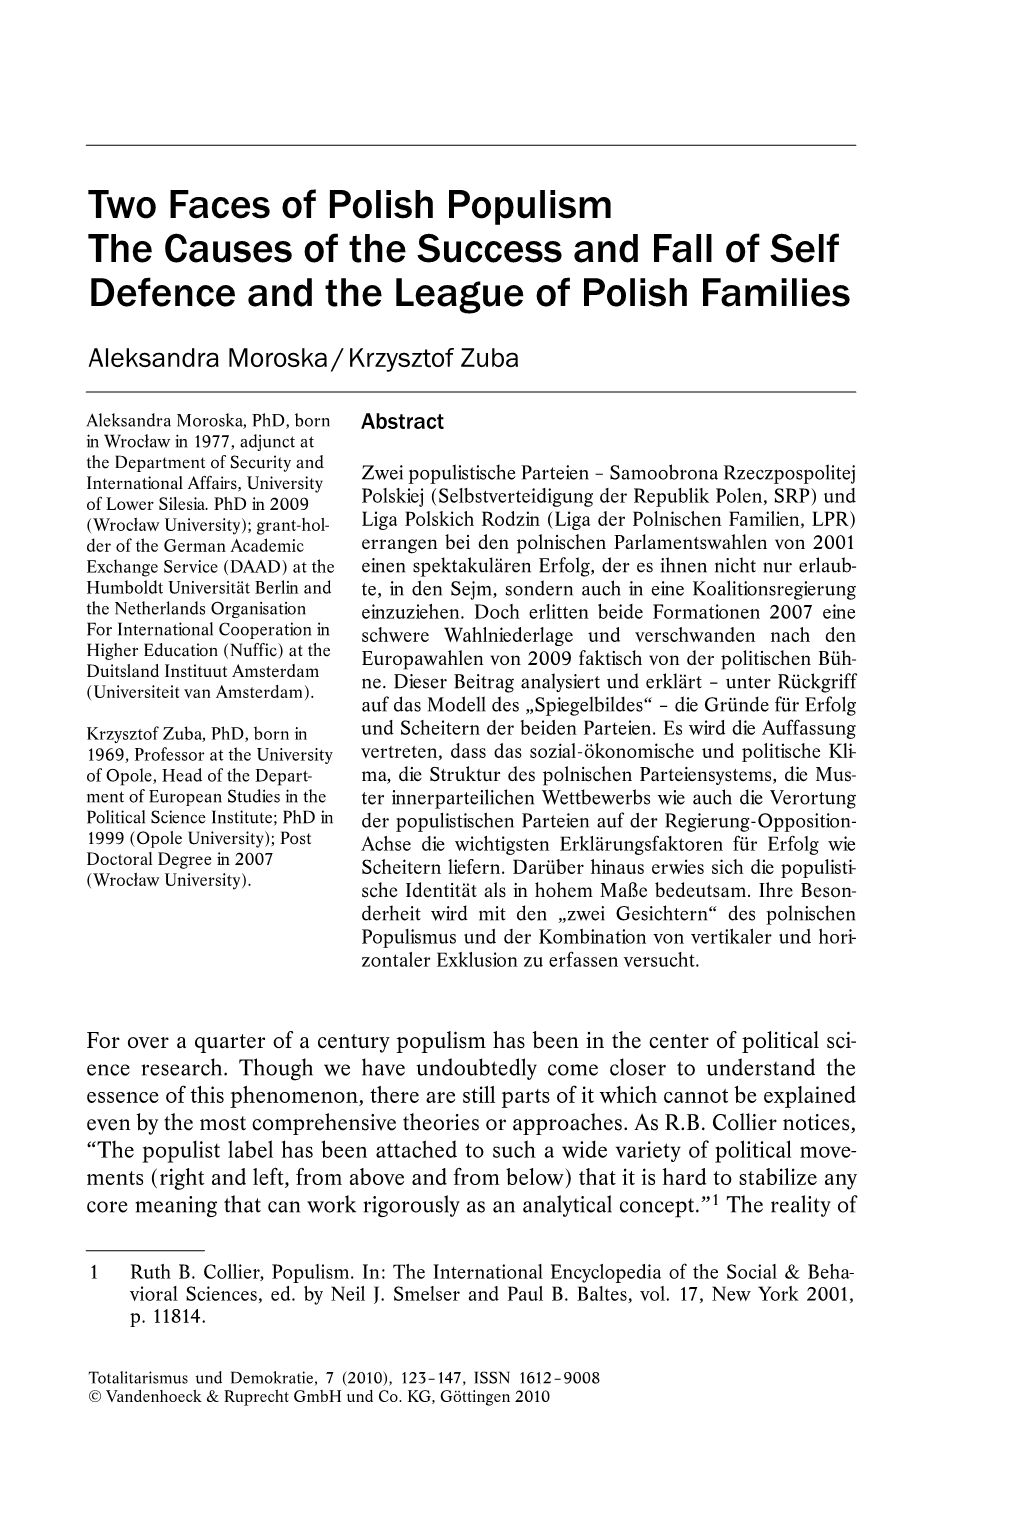 Two Faces of Polish Populism the Causes of the Success and Fall of Self Defence and the League of Polish Families